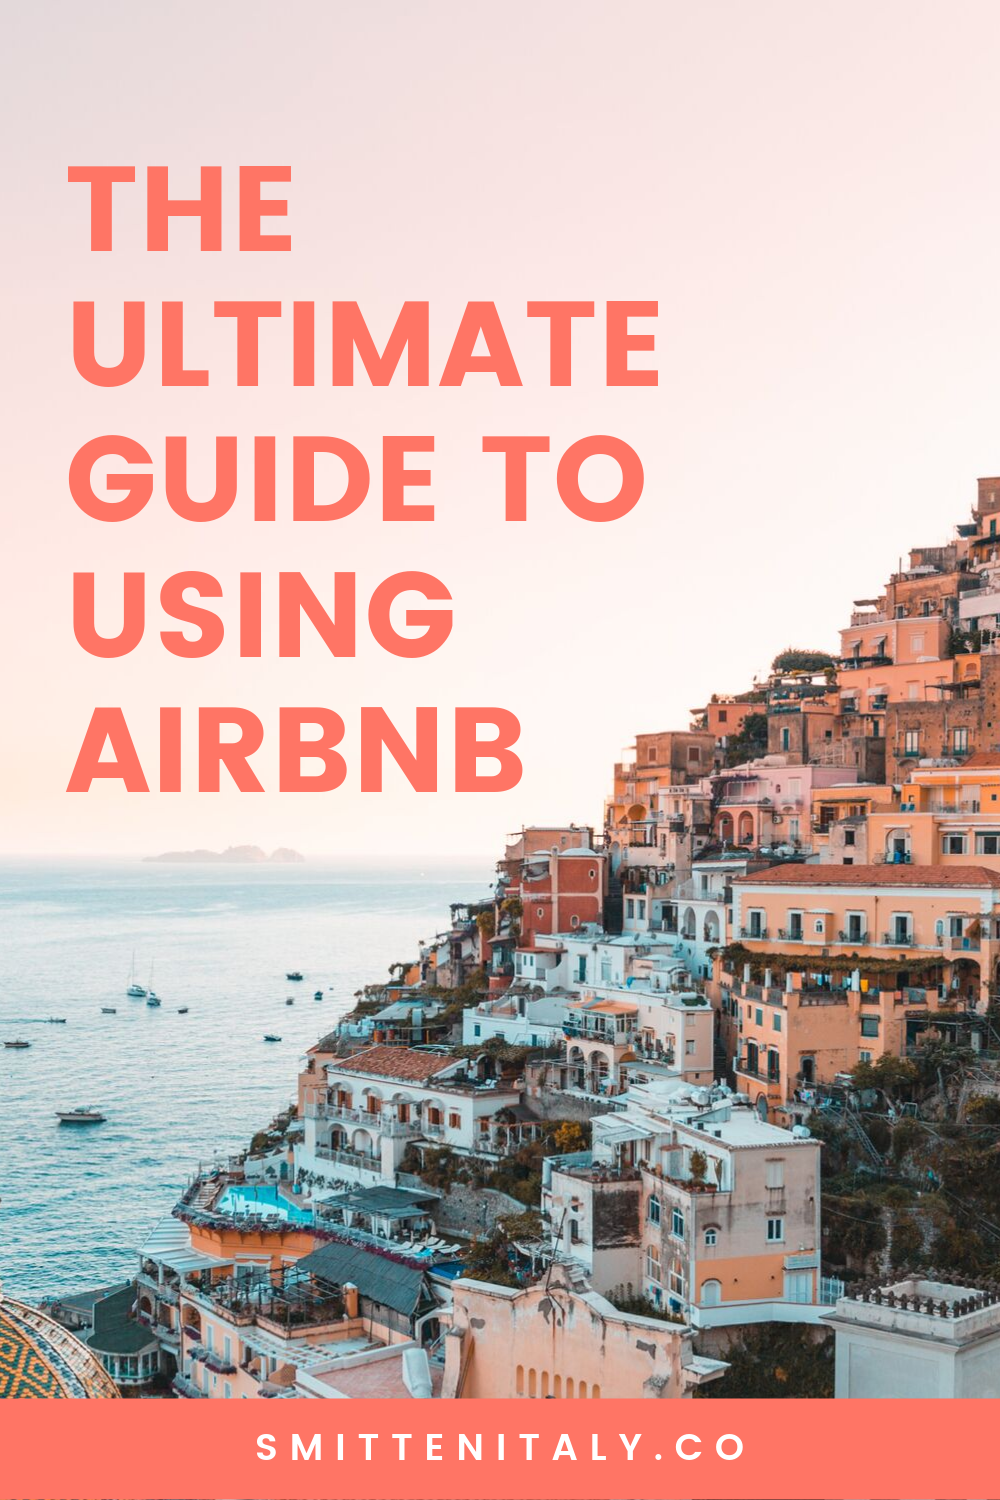 Ultimate guide to using Airbnb in Italy